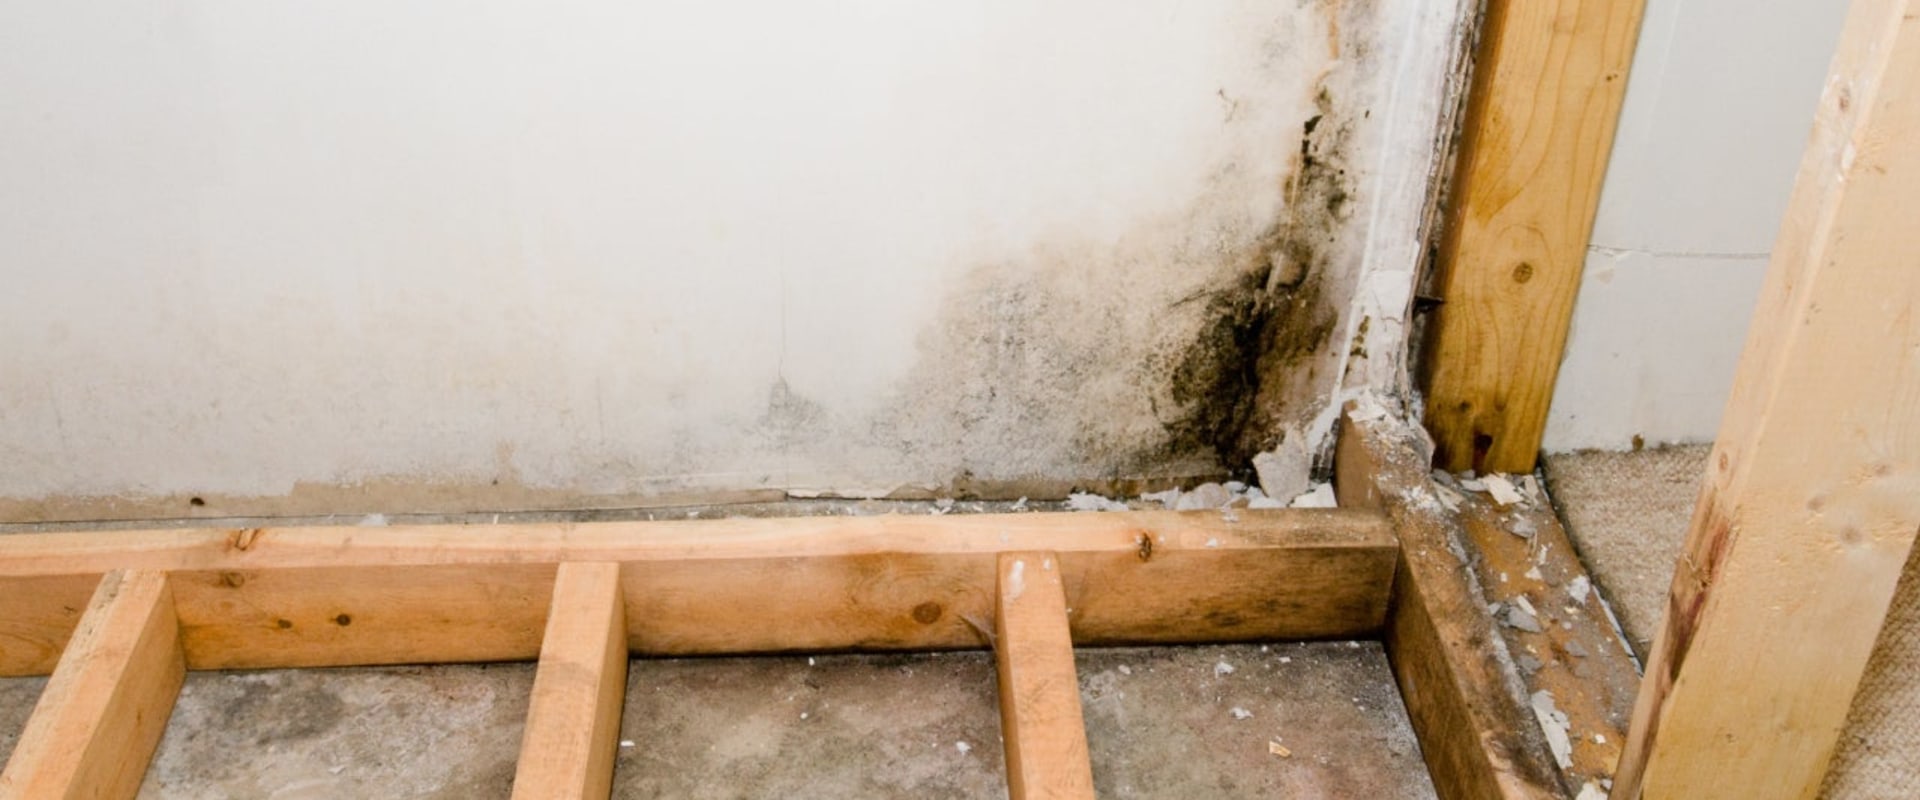 When does homeowners insurance cover mold?